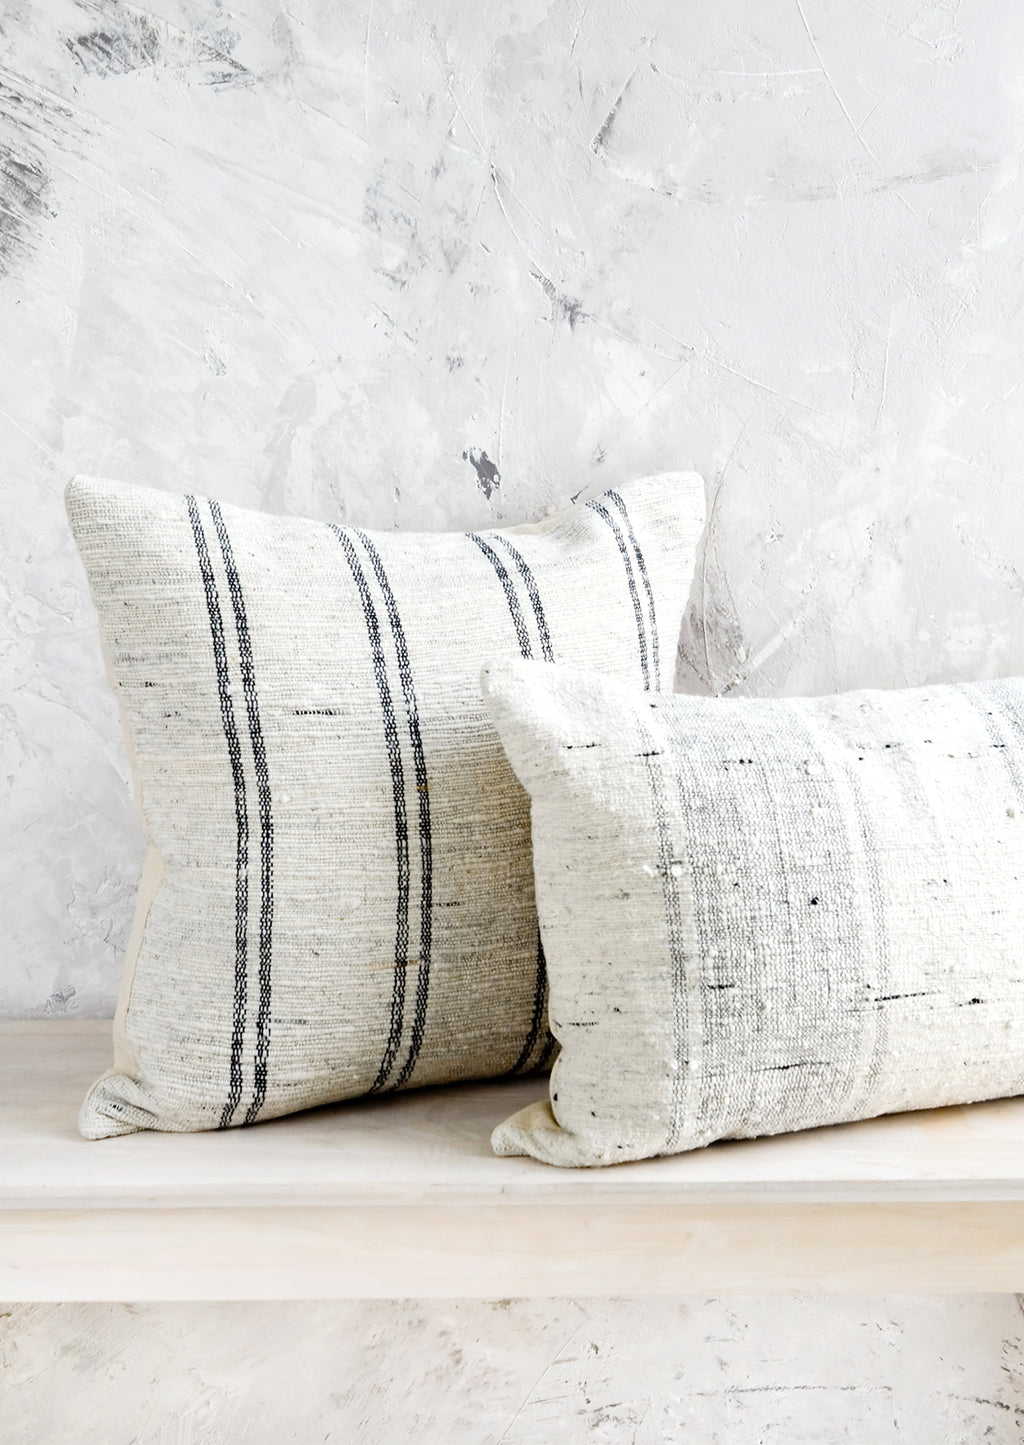 2: Square and lumbar throw pillows in white slub fabric with grey or black stripes.